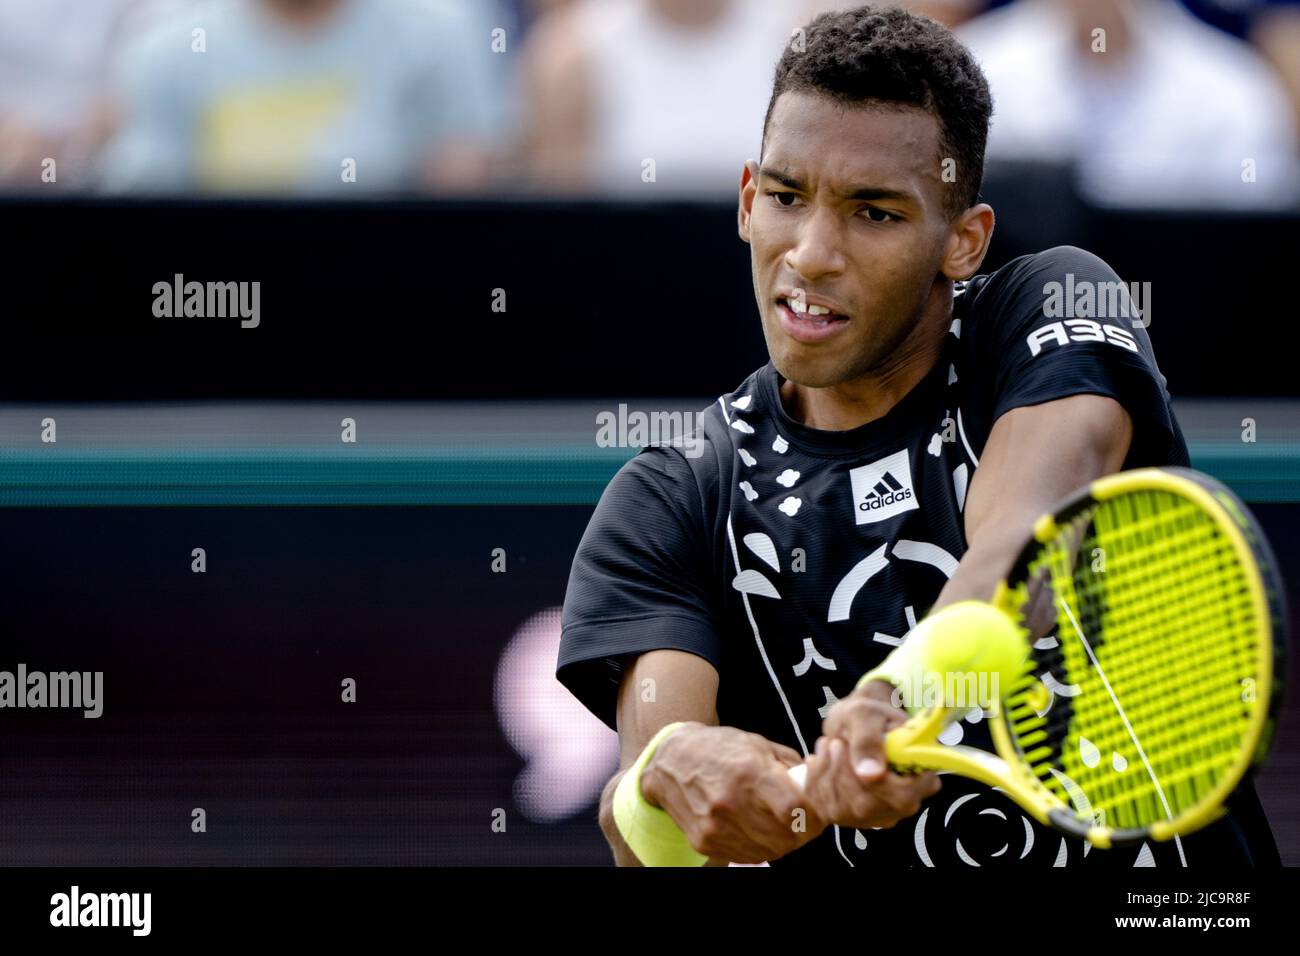 2022-06-11 15:22:17 ROSMALEN - Tennis player Felix Auger-Aliassime (Canada)  in action during the match against Tim Van Rijthoven (not in photo) at the  international tennis tournament Libema Open. The combined Dutch tennis